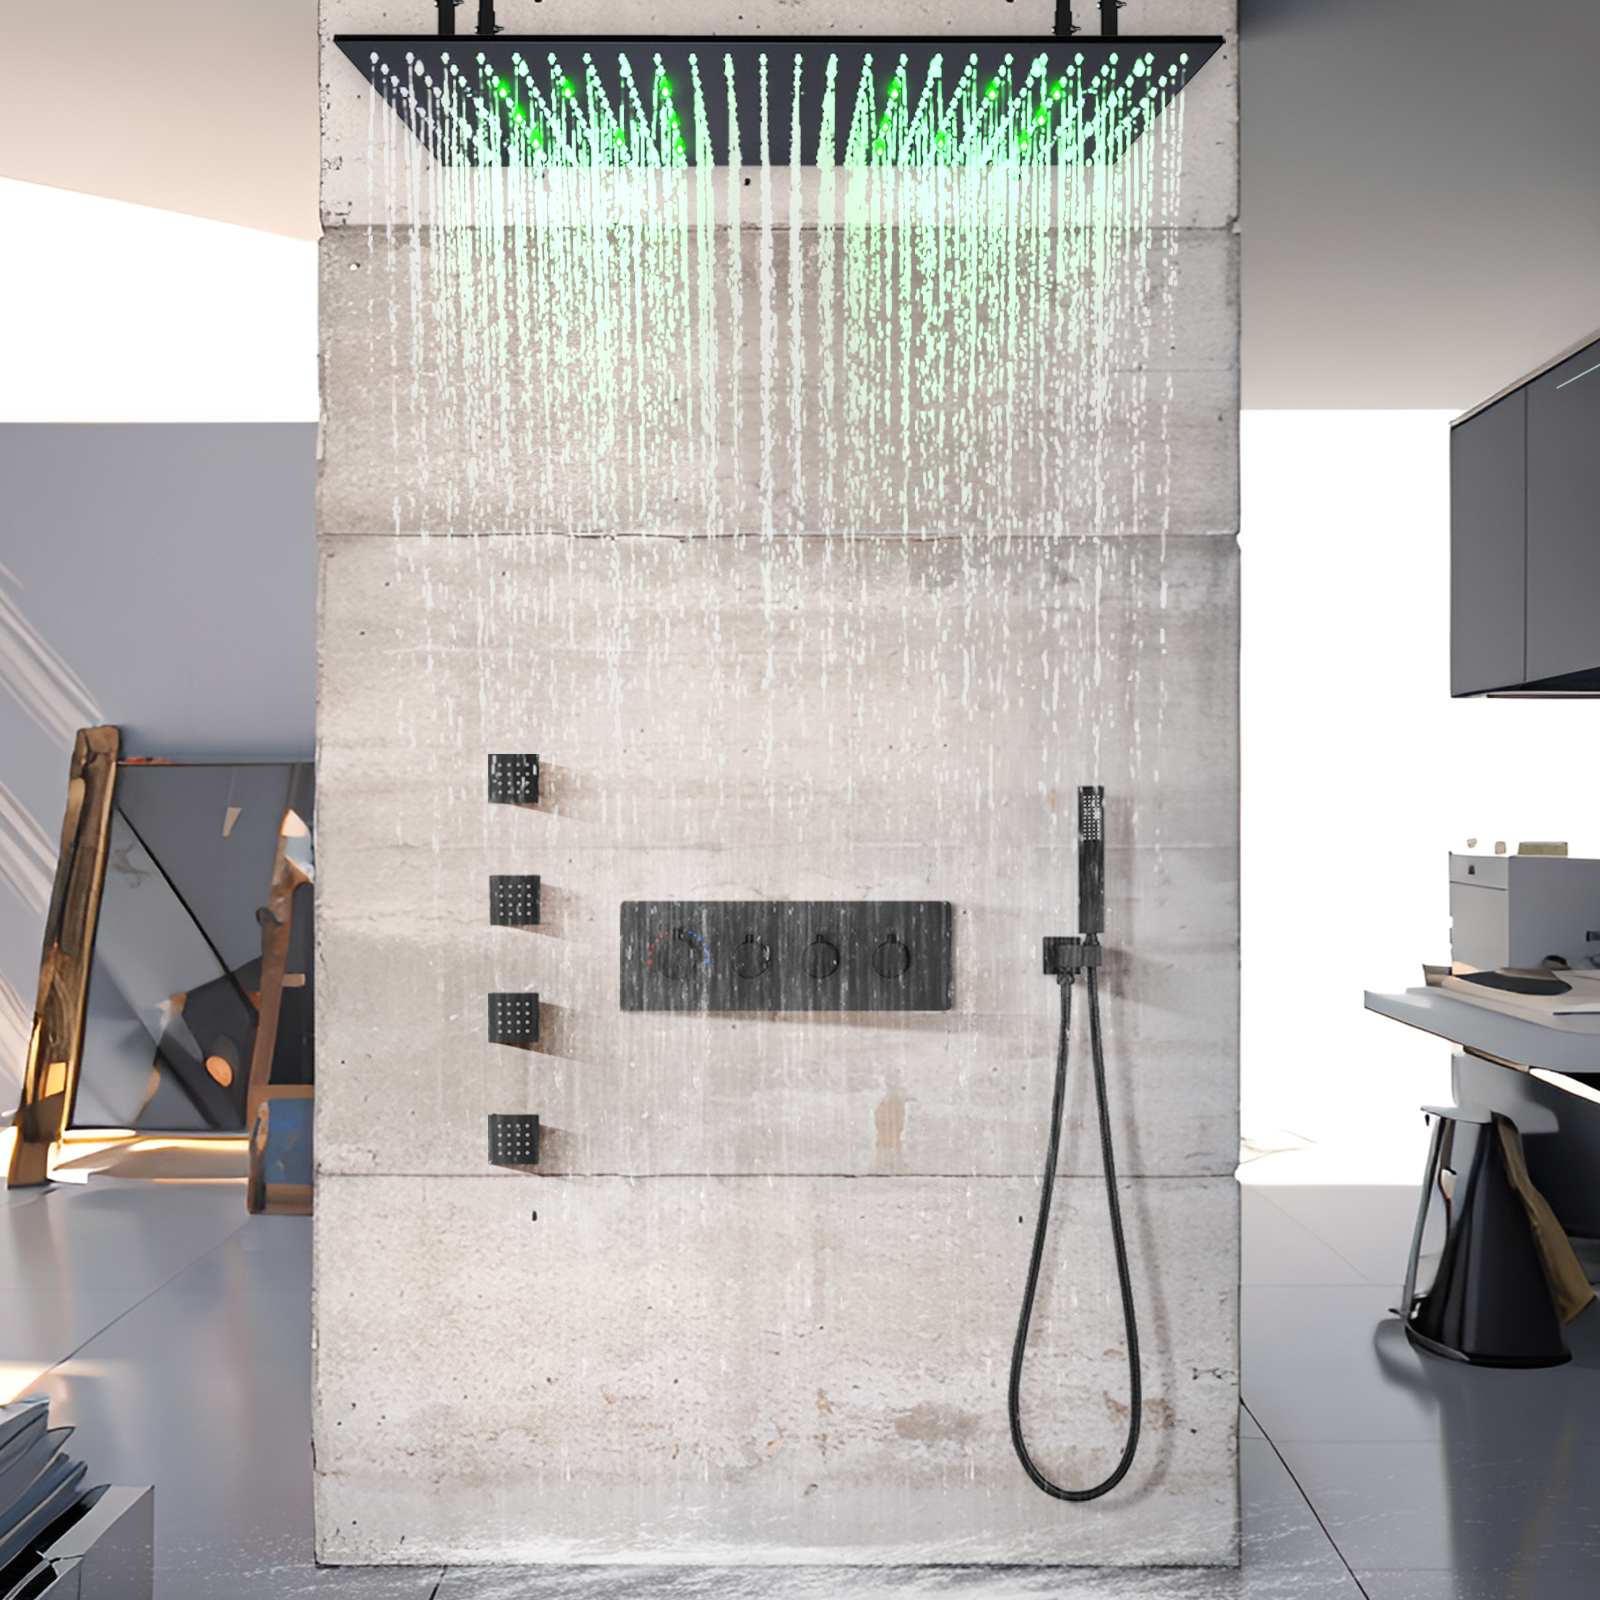 100x50cm Matte Black Constant Temperature Shower Combination Kit Wall -mounted LED Shower Head System